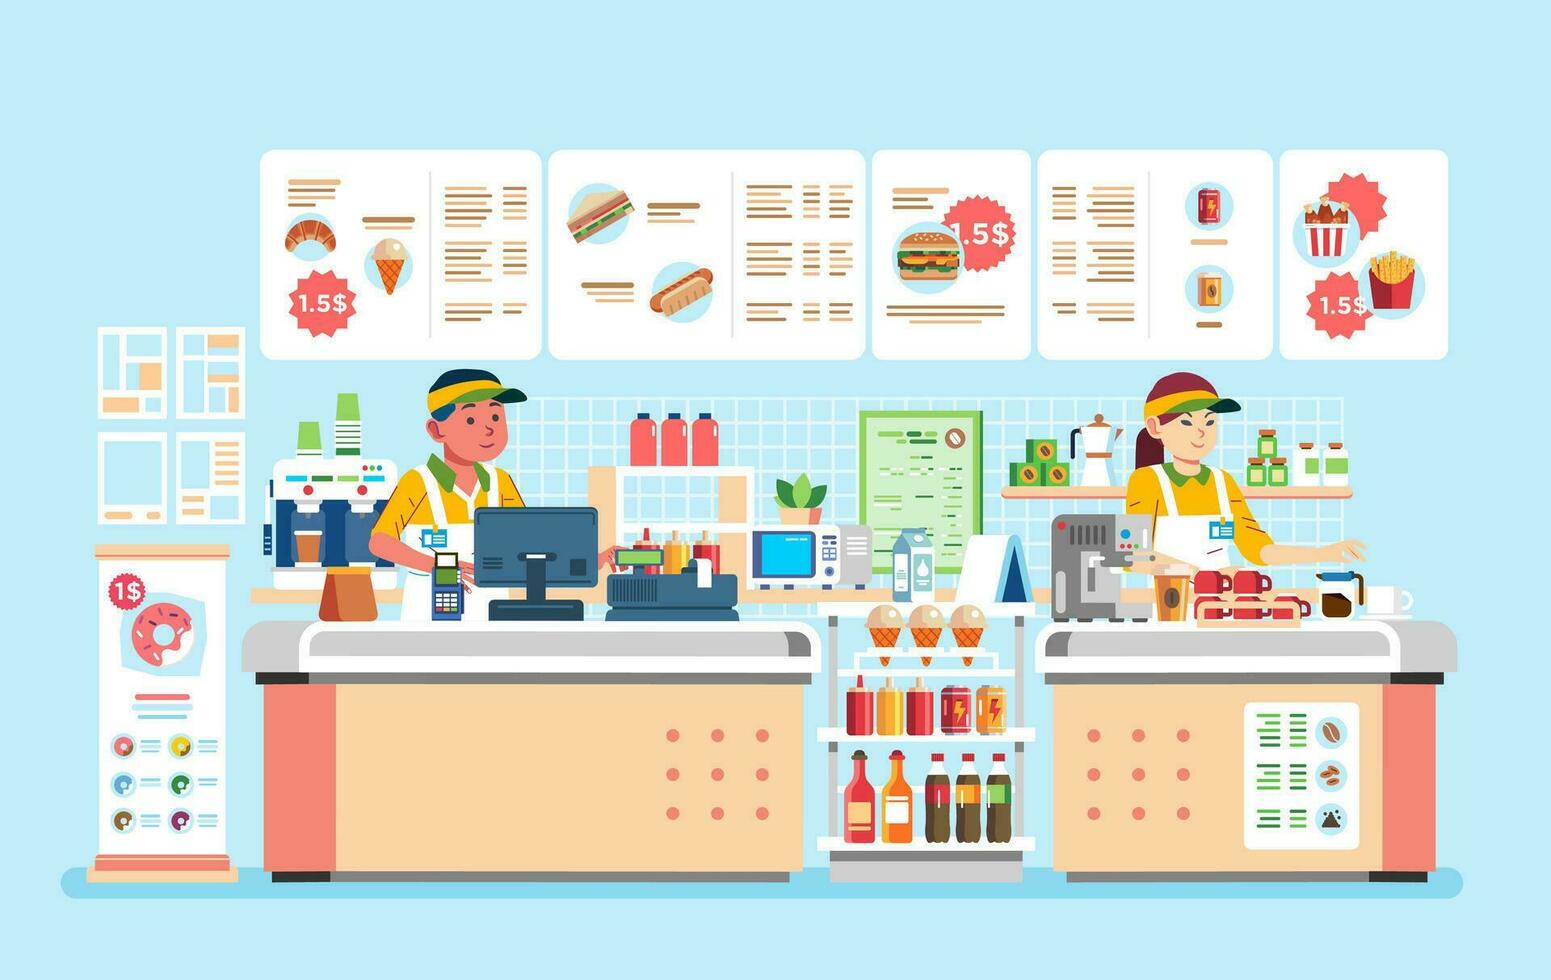 male and female cashier at fast food restaurant with hamburger, doughnout, hotdog, and many beverages vector illustration